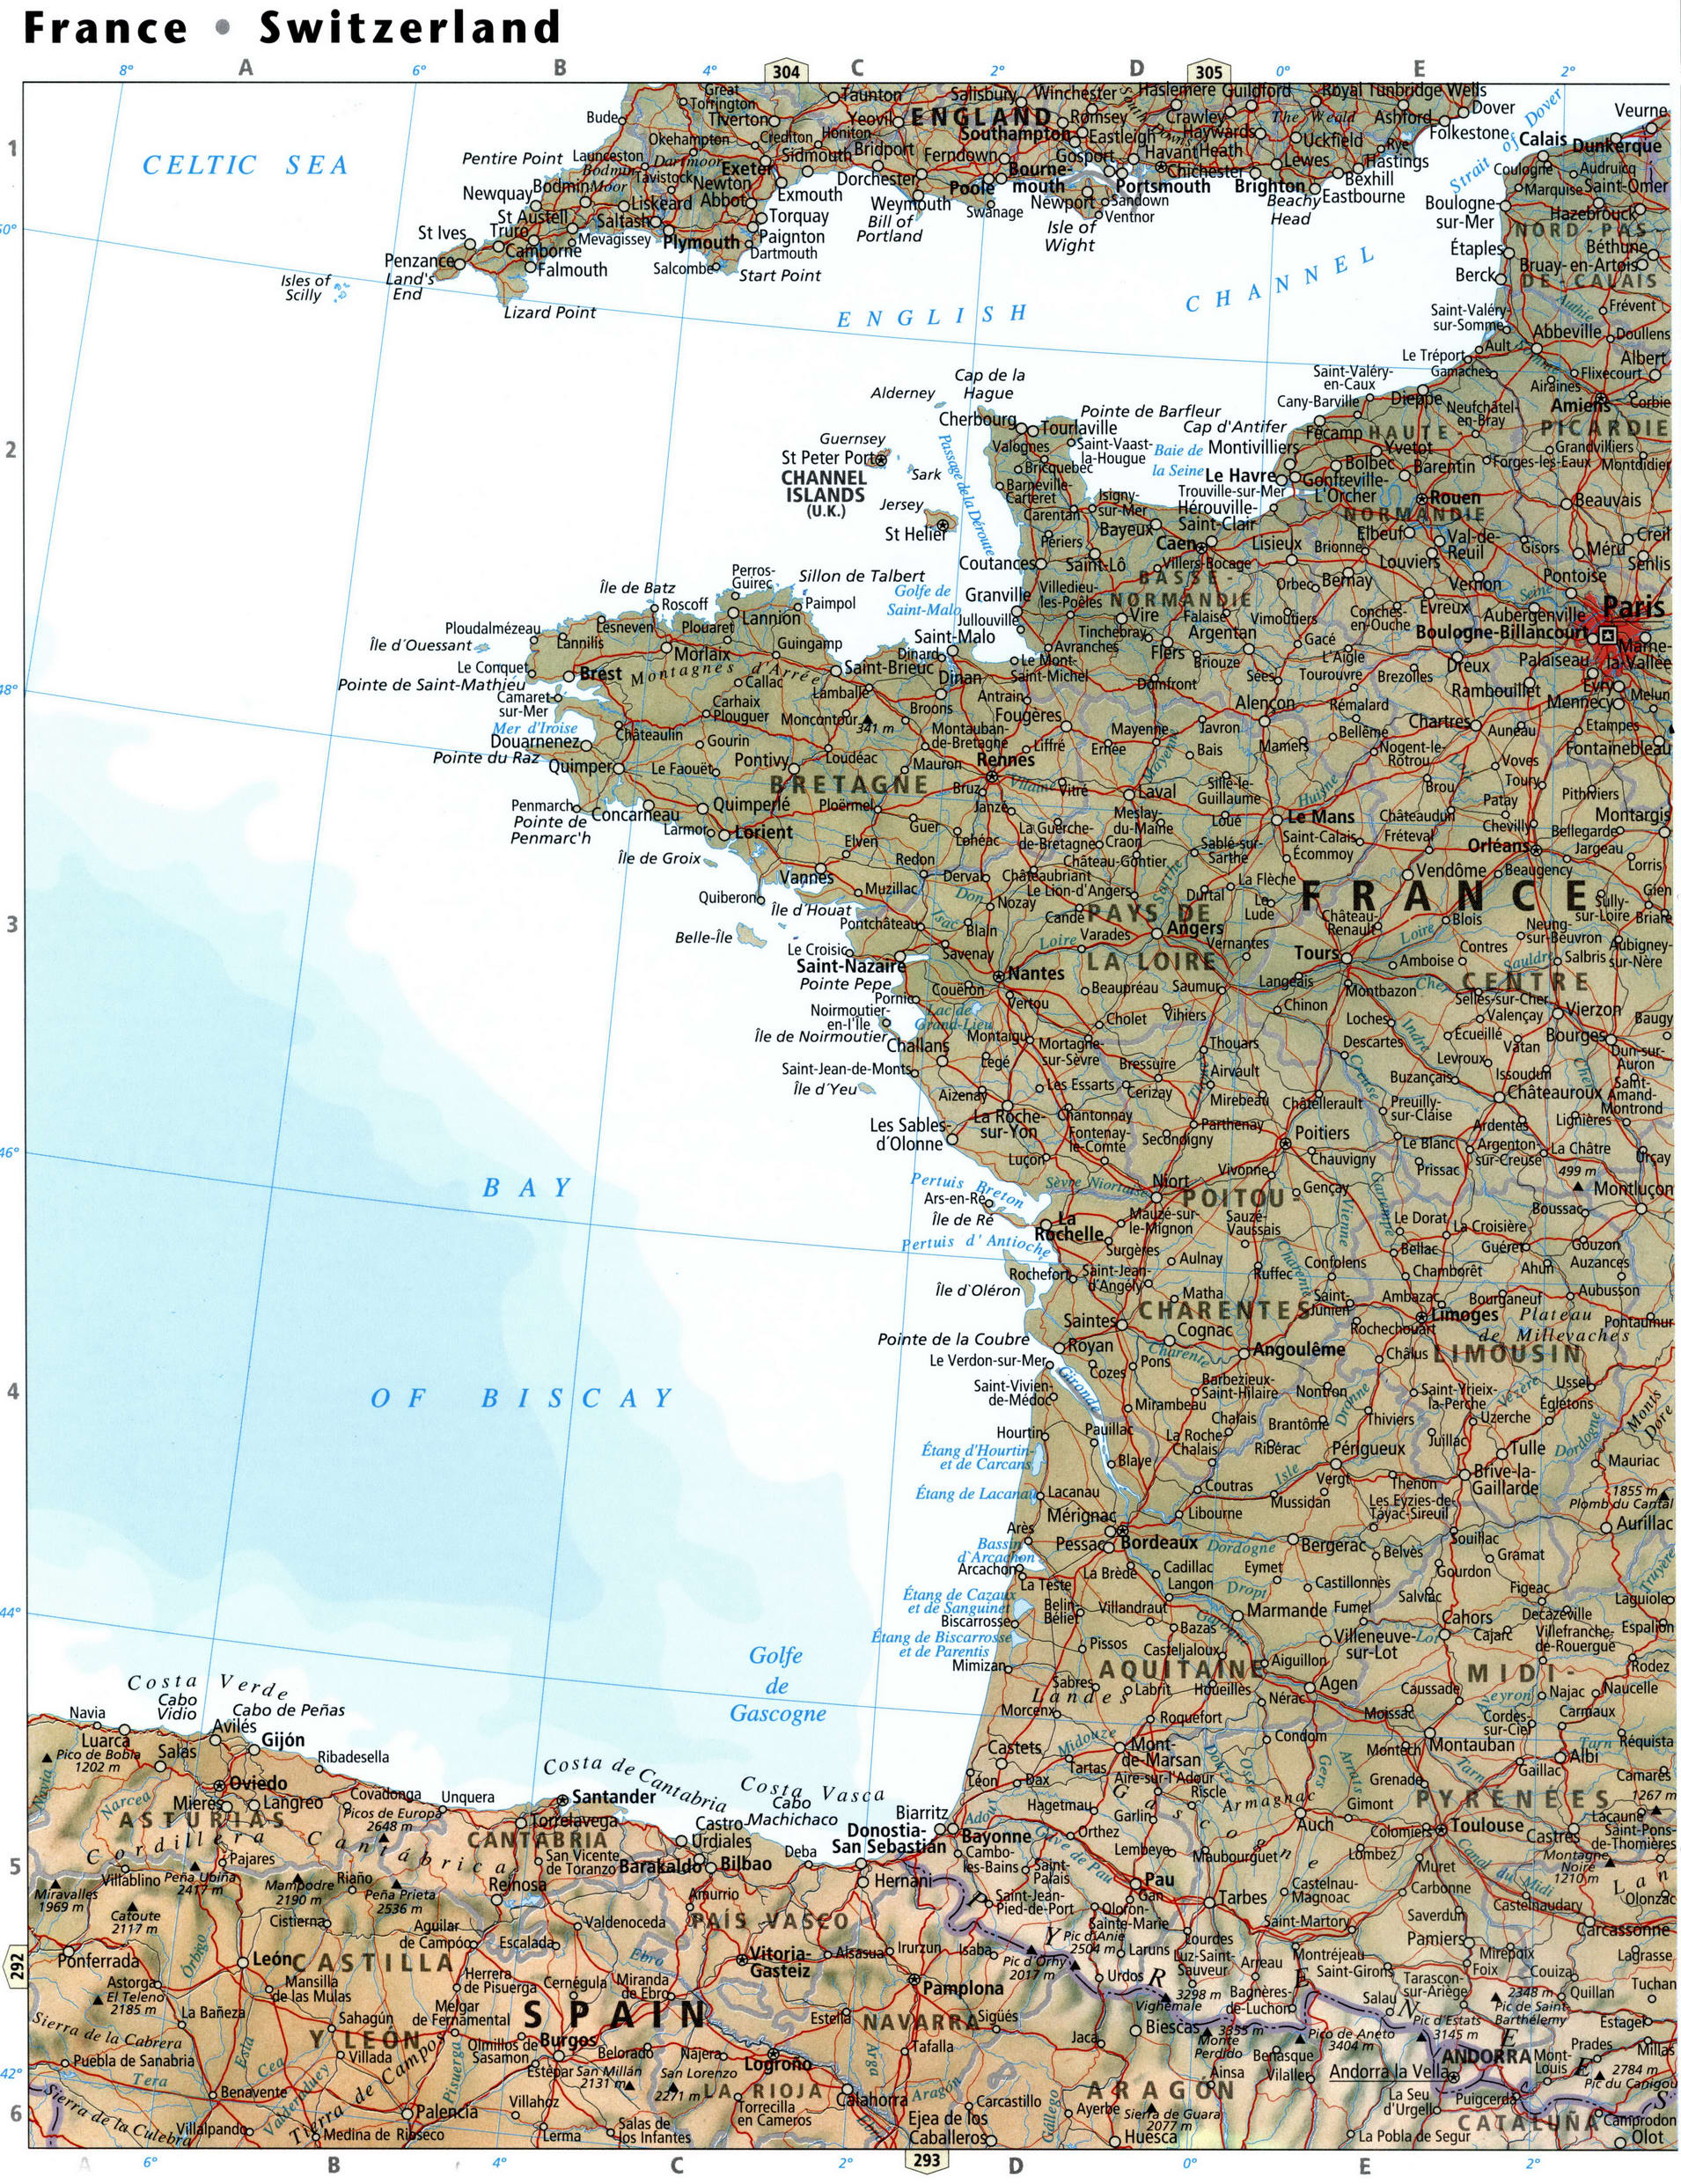 France and Switzerland map physical features, free map with cities ...